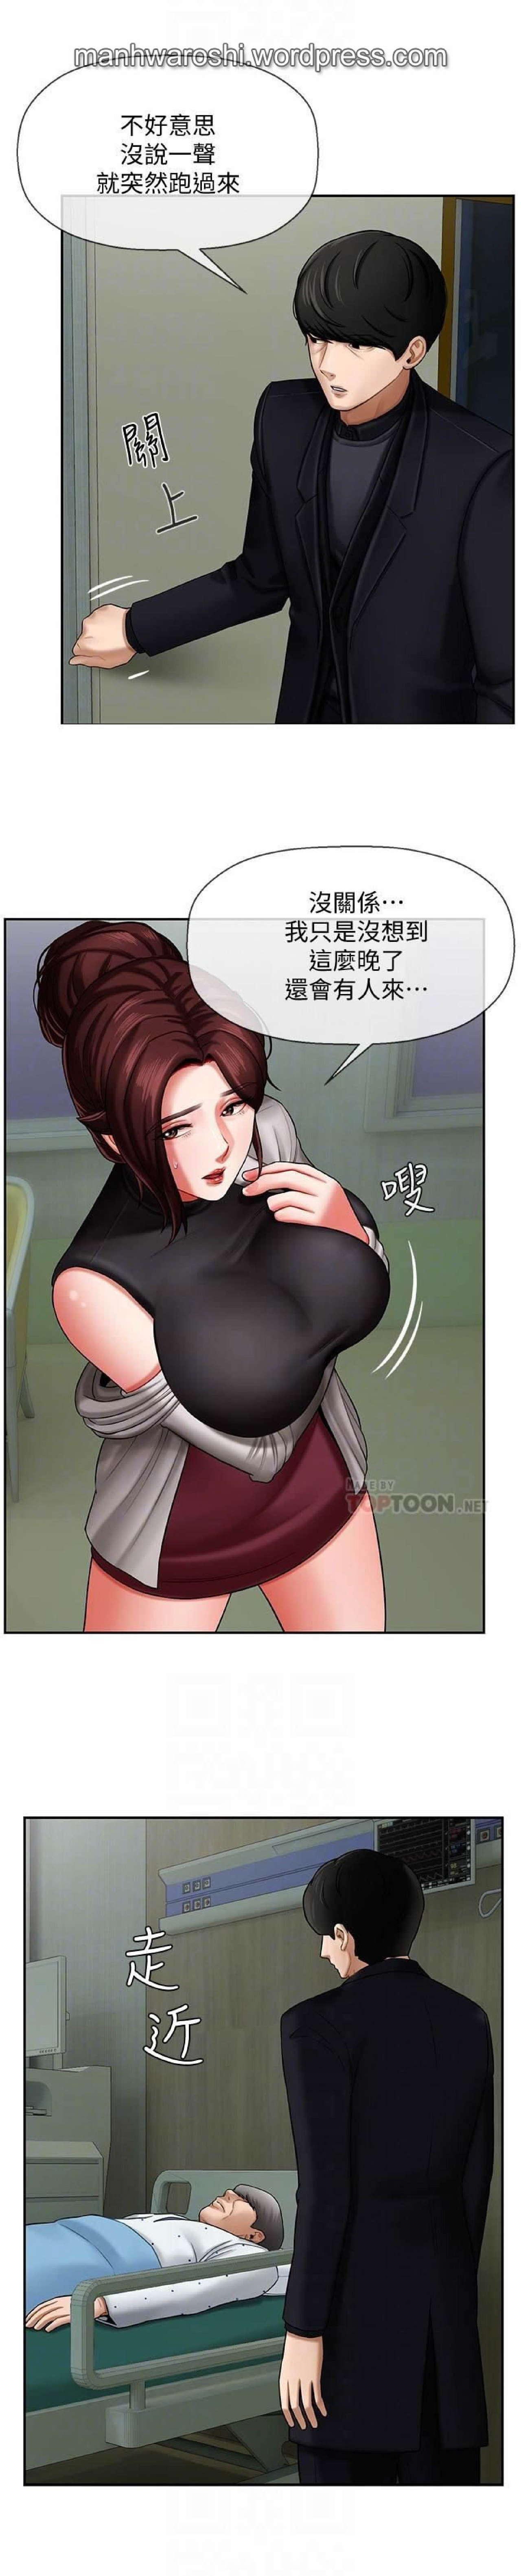 Oldyoung 坏老师 | PHYSICAL CLASSROOM 3 Cream Pie - Page 6